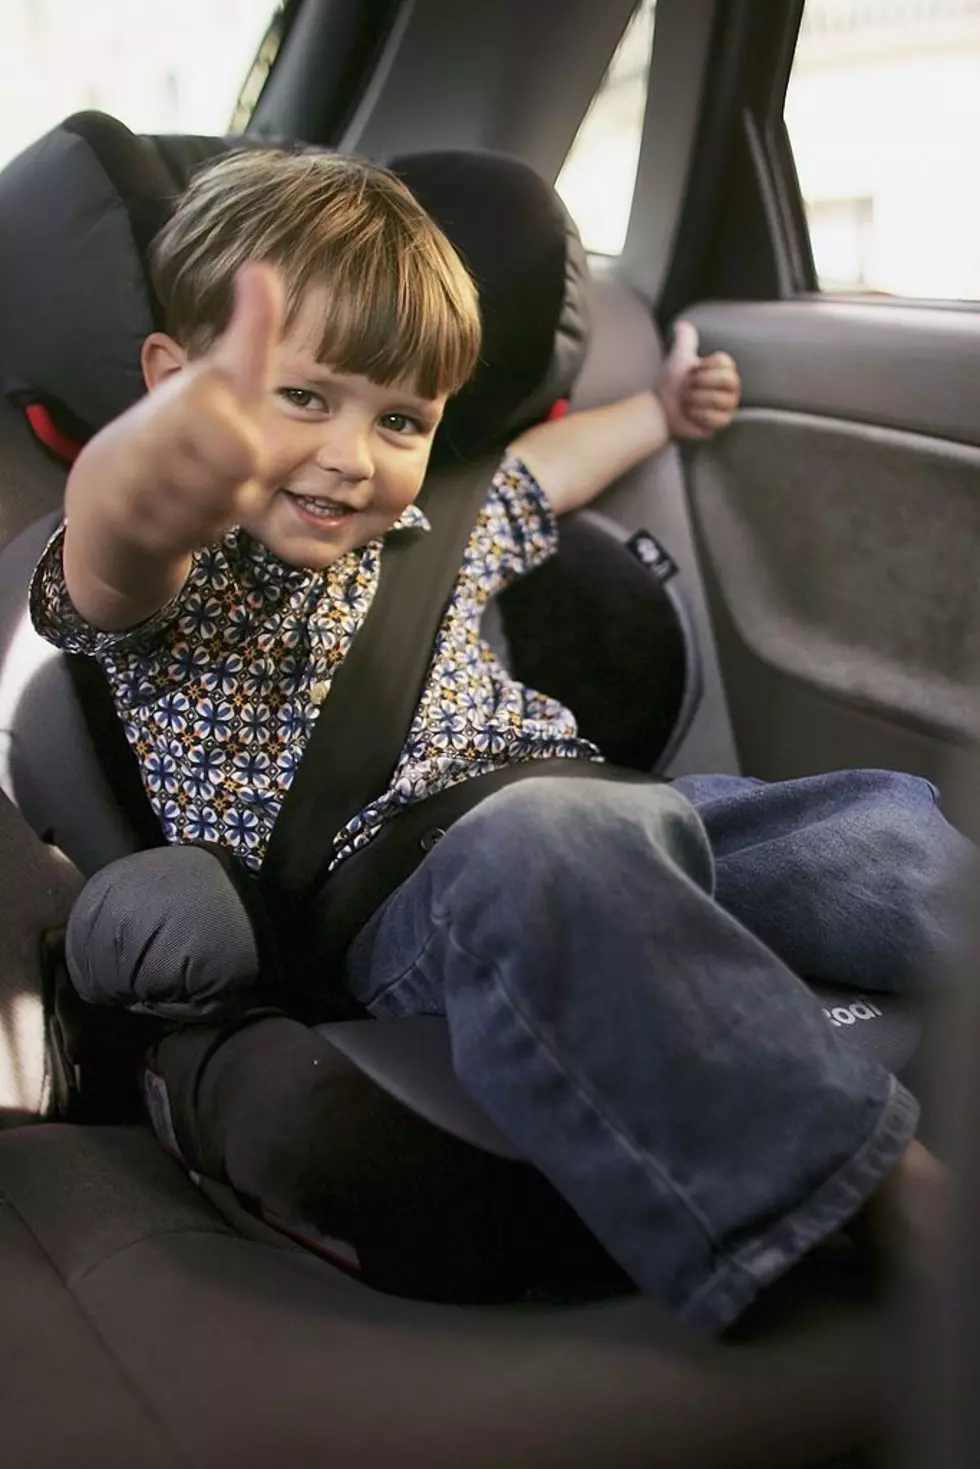 Free Child Car Seat Inspections and Assistance Oct. 14